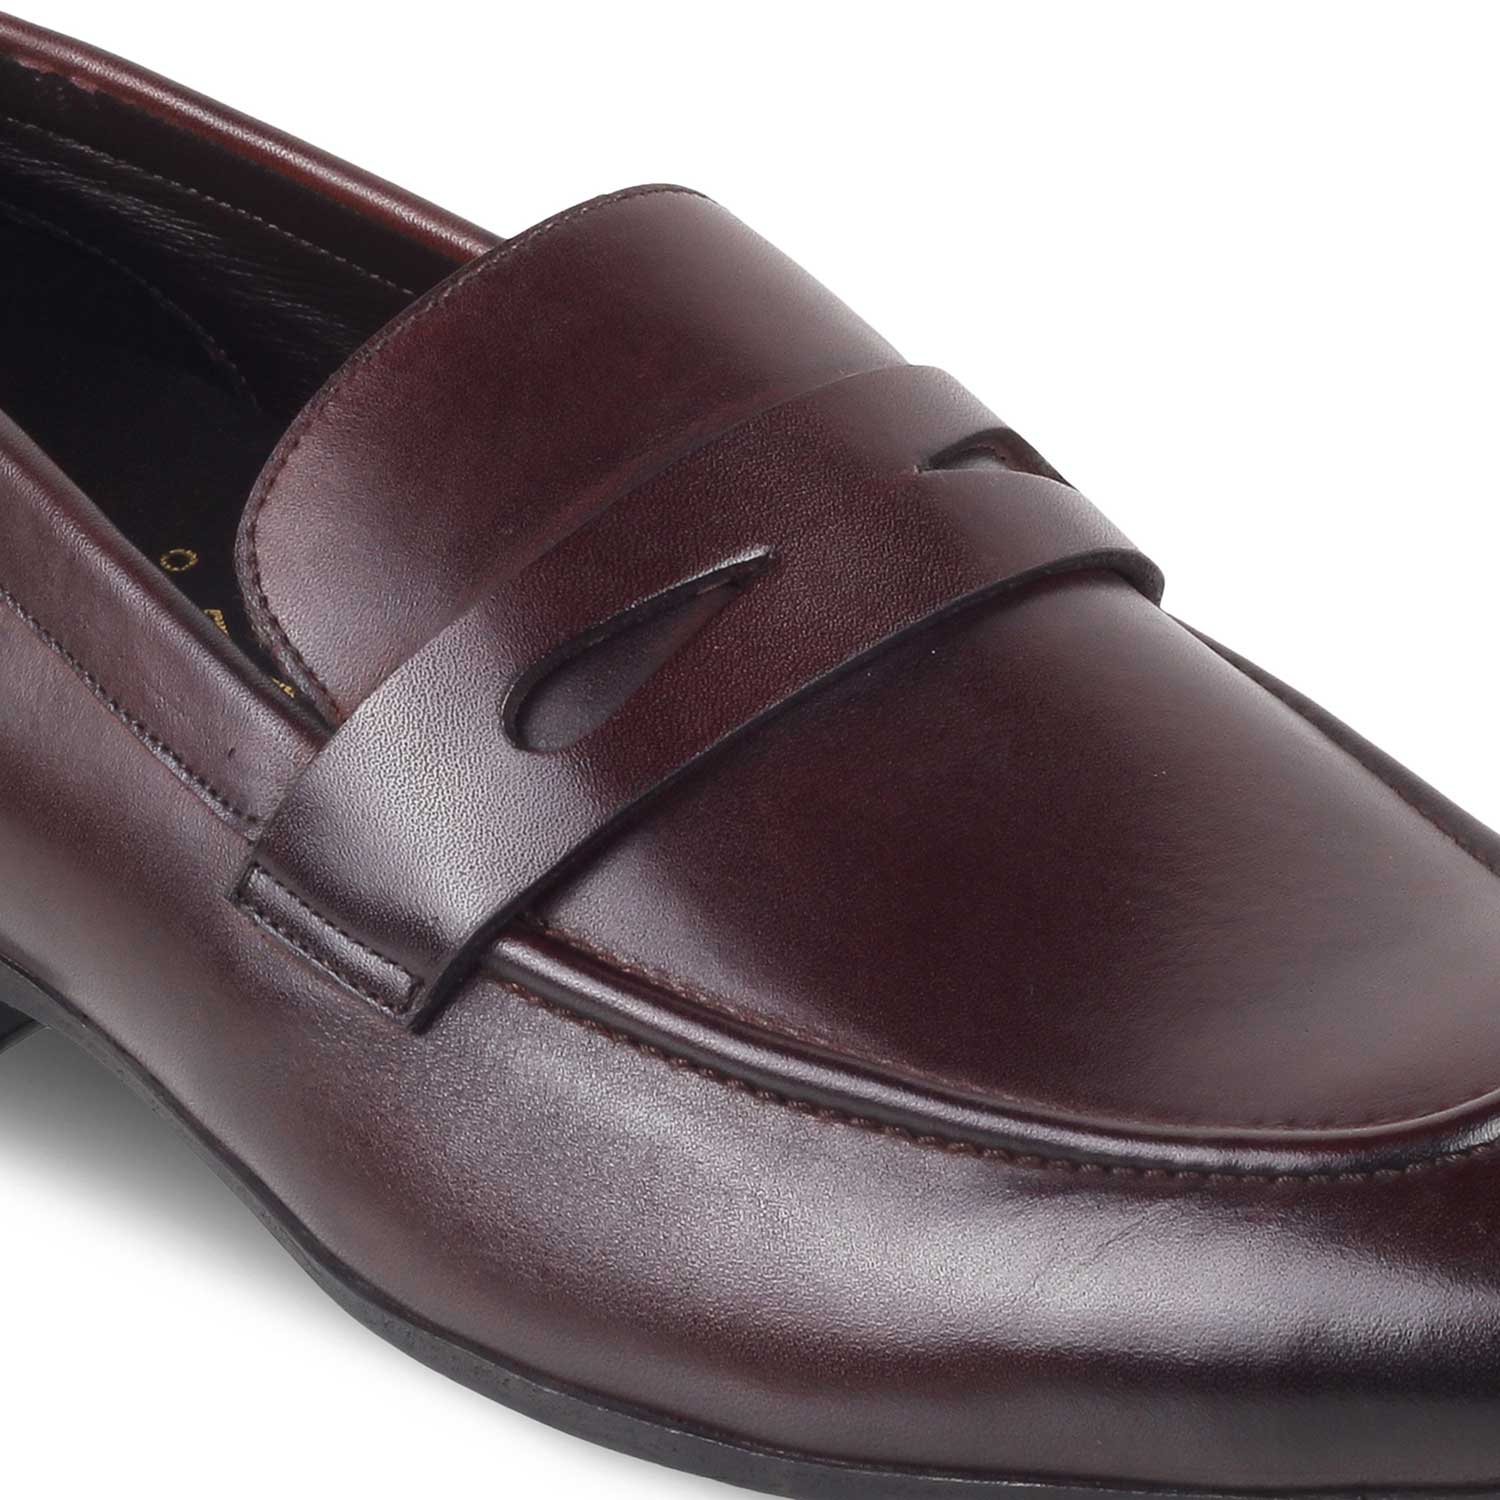 The Apenny Brown Men's Leather Penny Loafers Tresmode - Tresmode